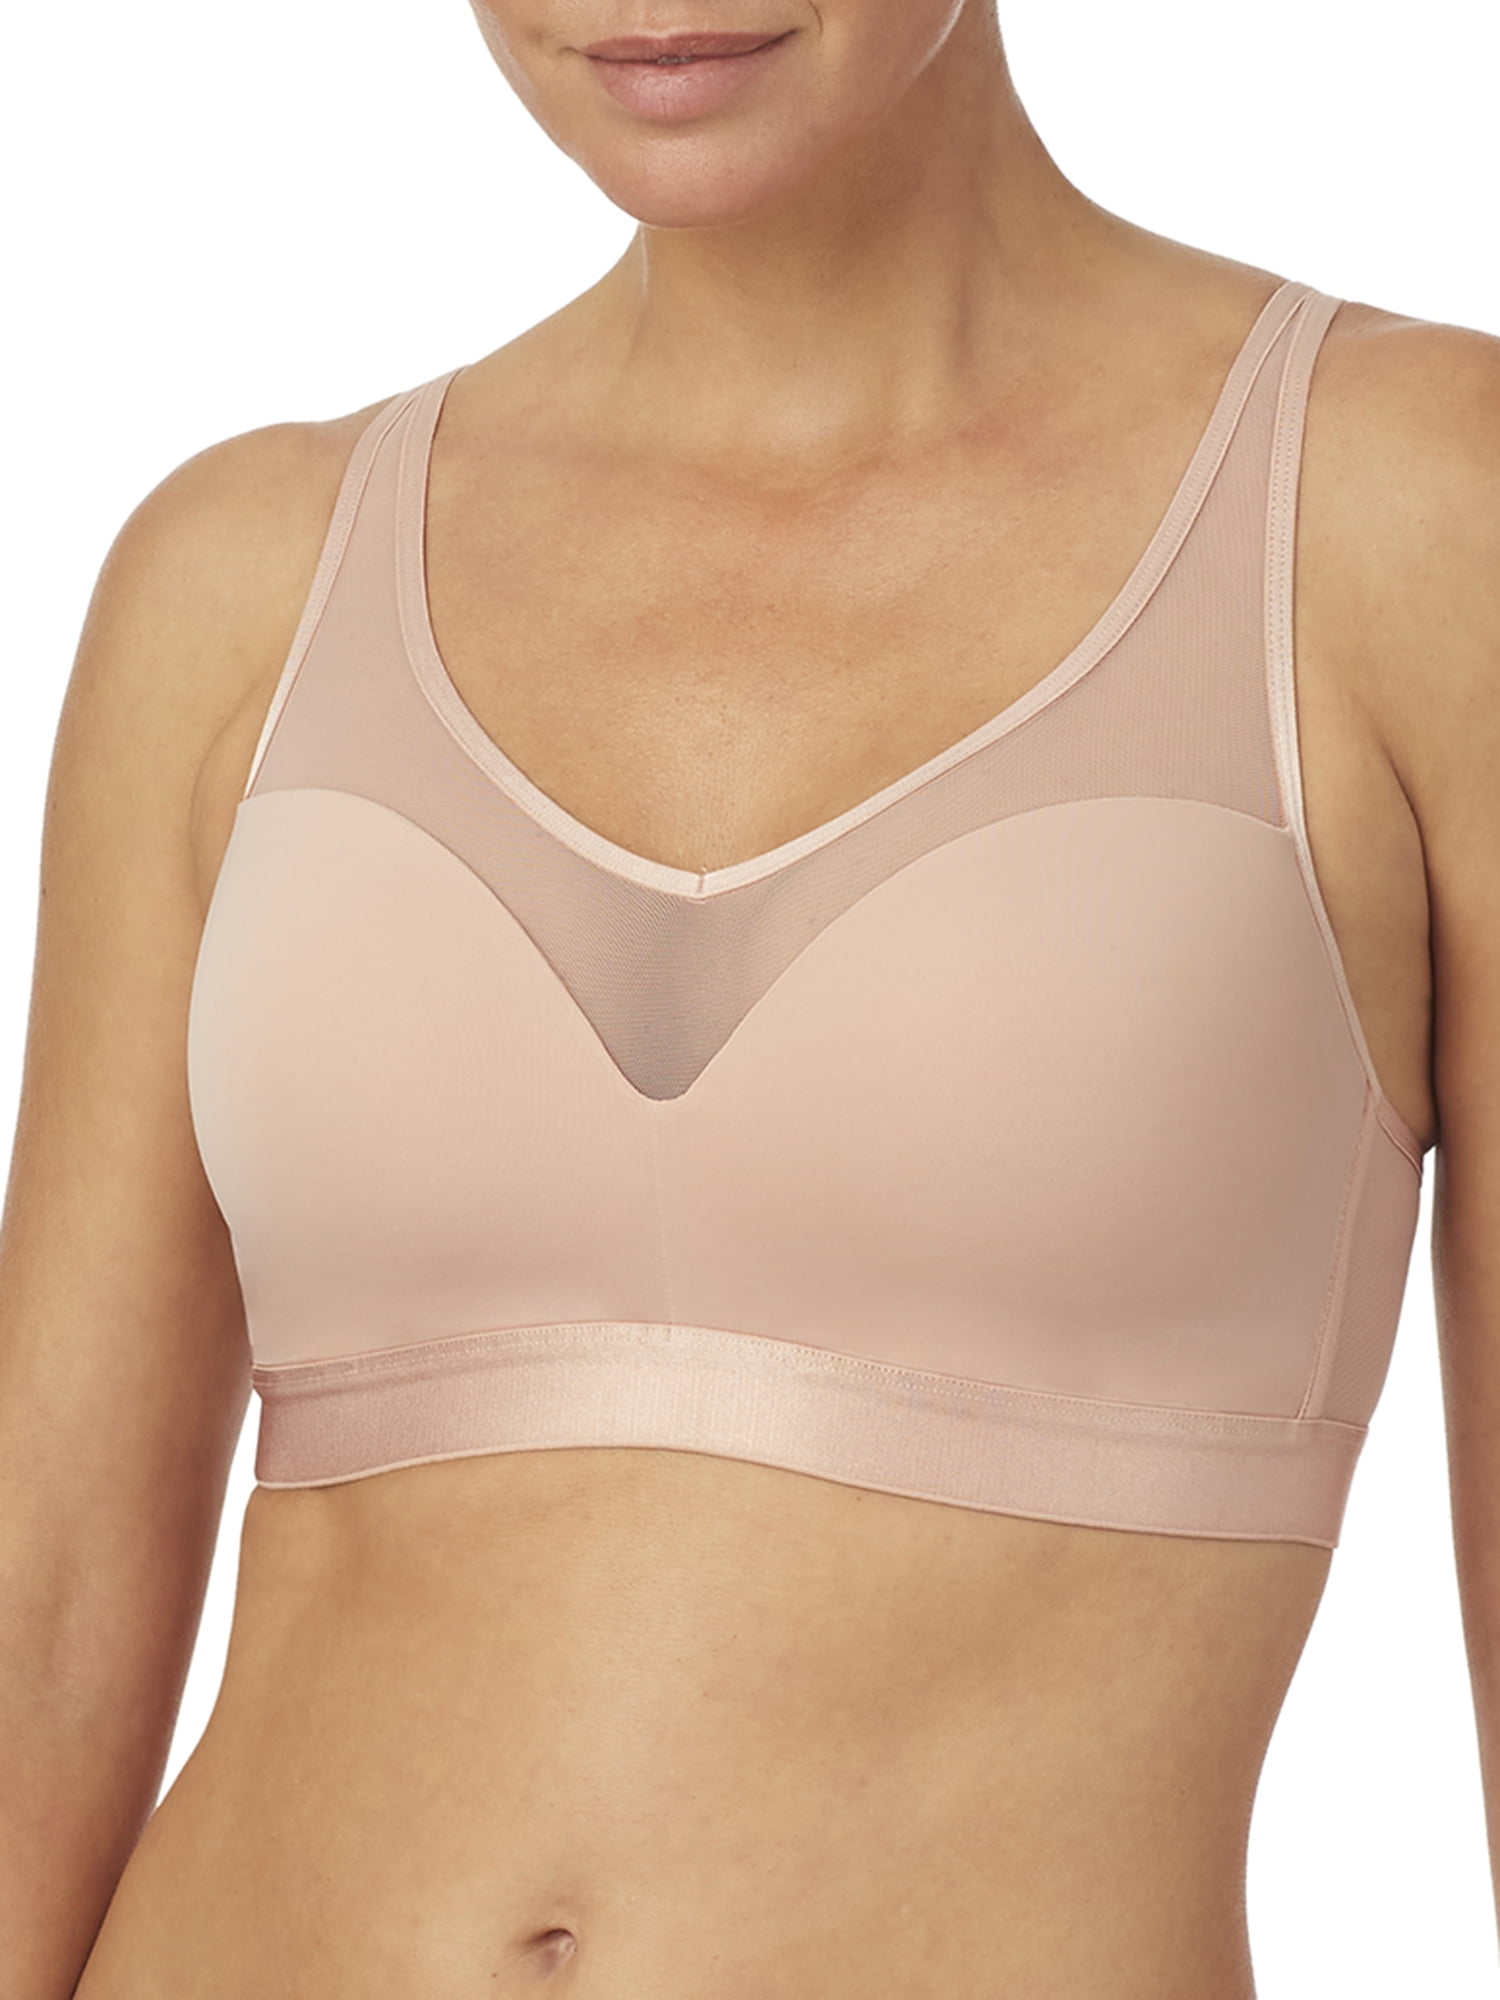 Secret Treasures Women's Cooling Wirefree Bra with Mesh 